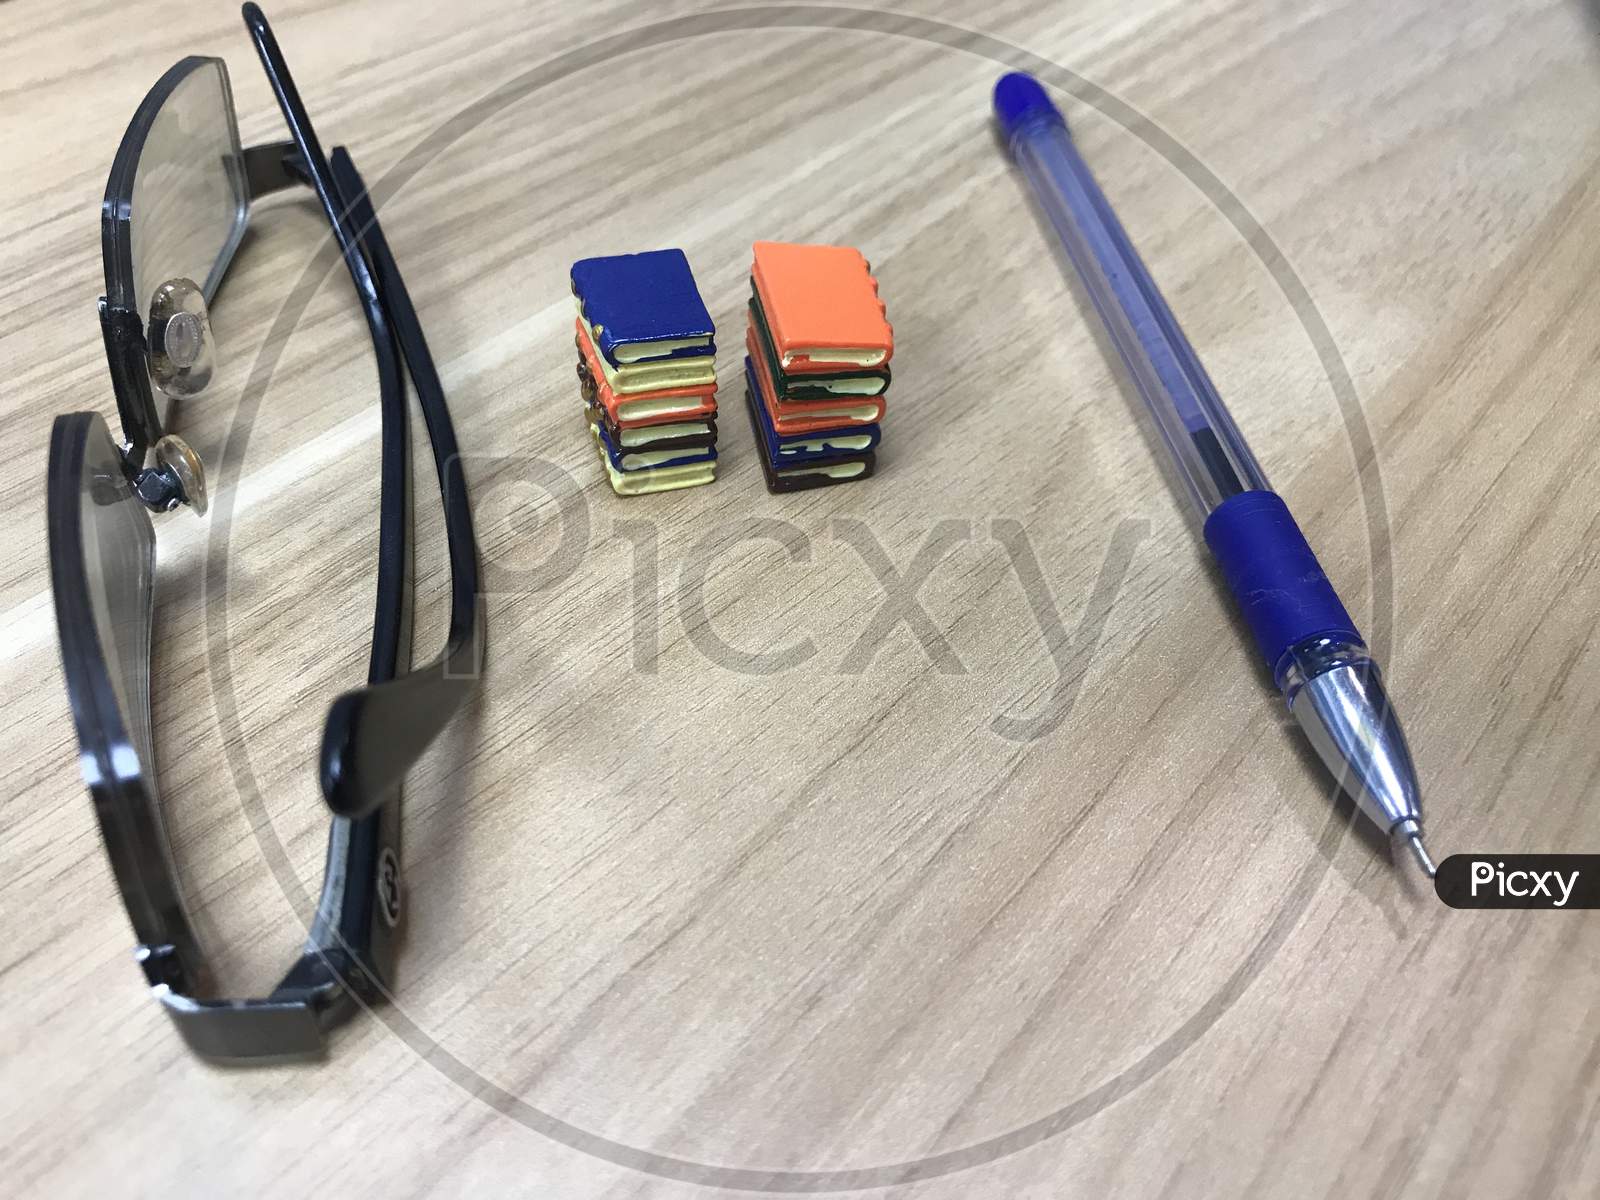 Book Toys And A Pen Representing A Life Of An Writer Who Can Impose His Ideas To People Who Like To Improve Their Literacy Level